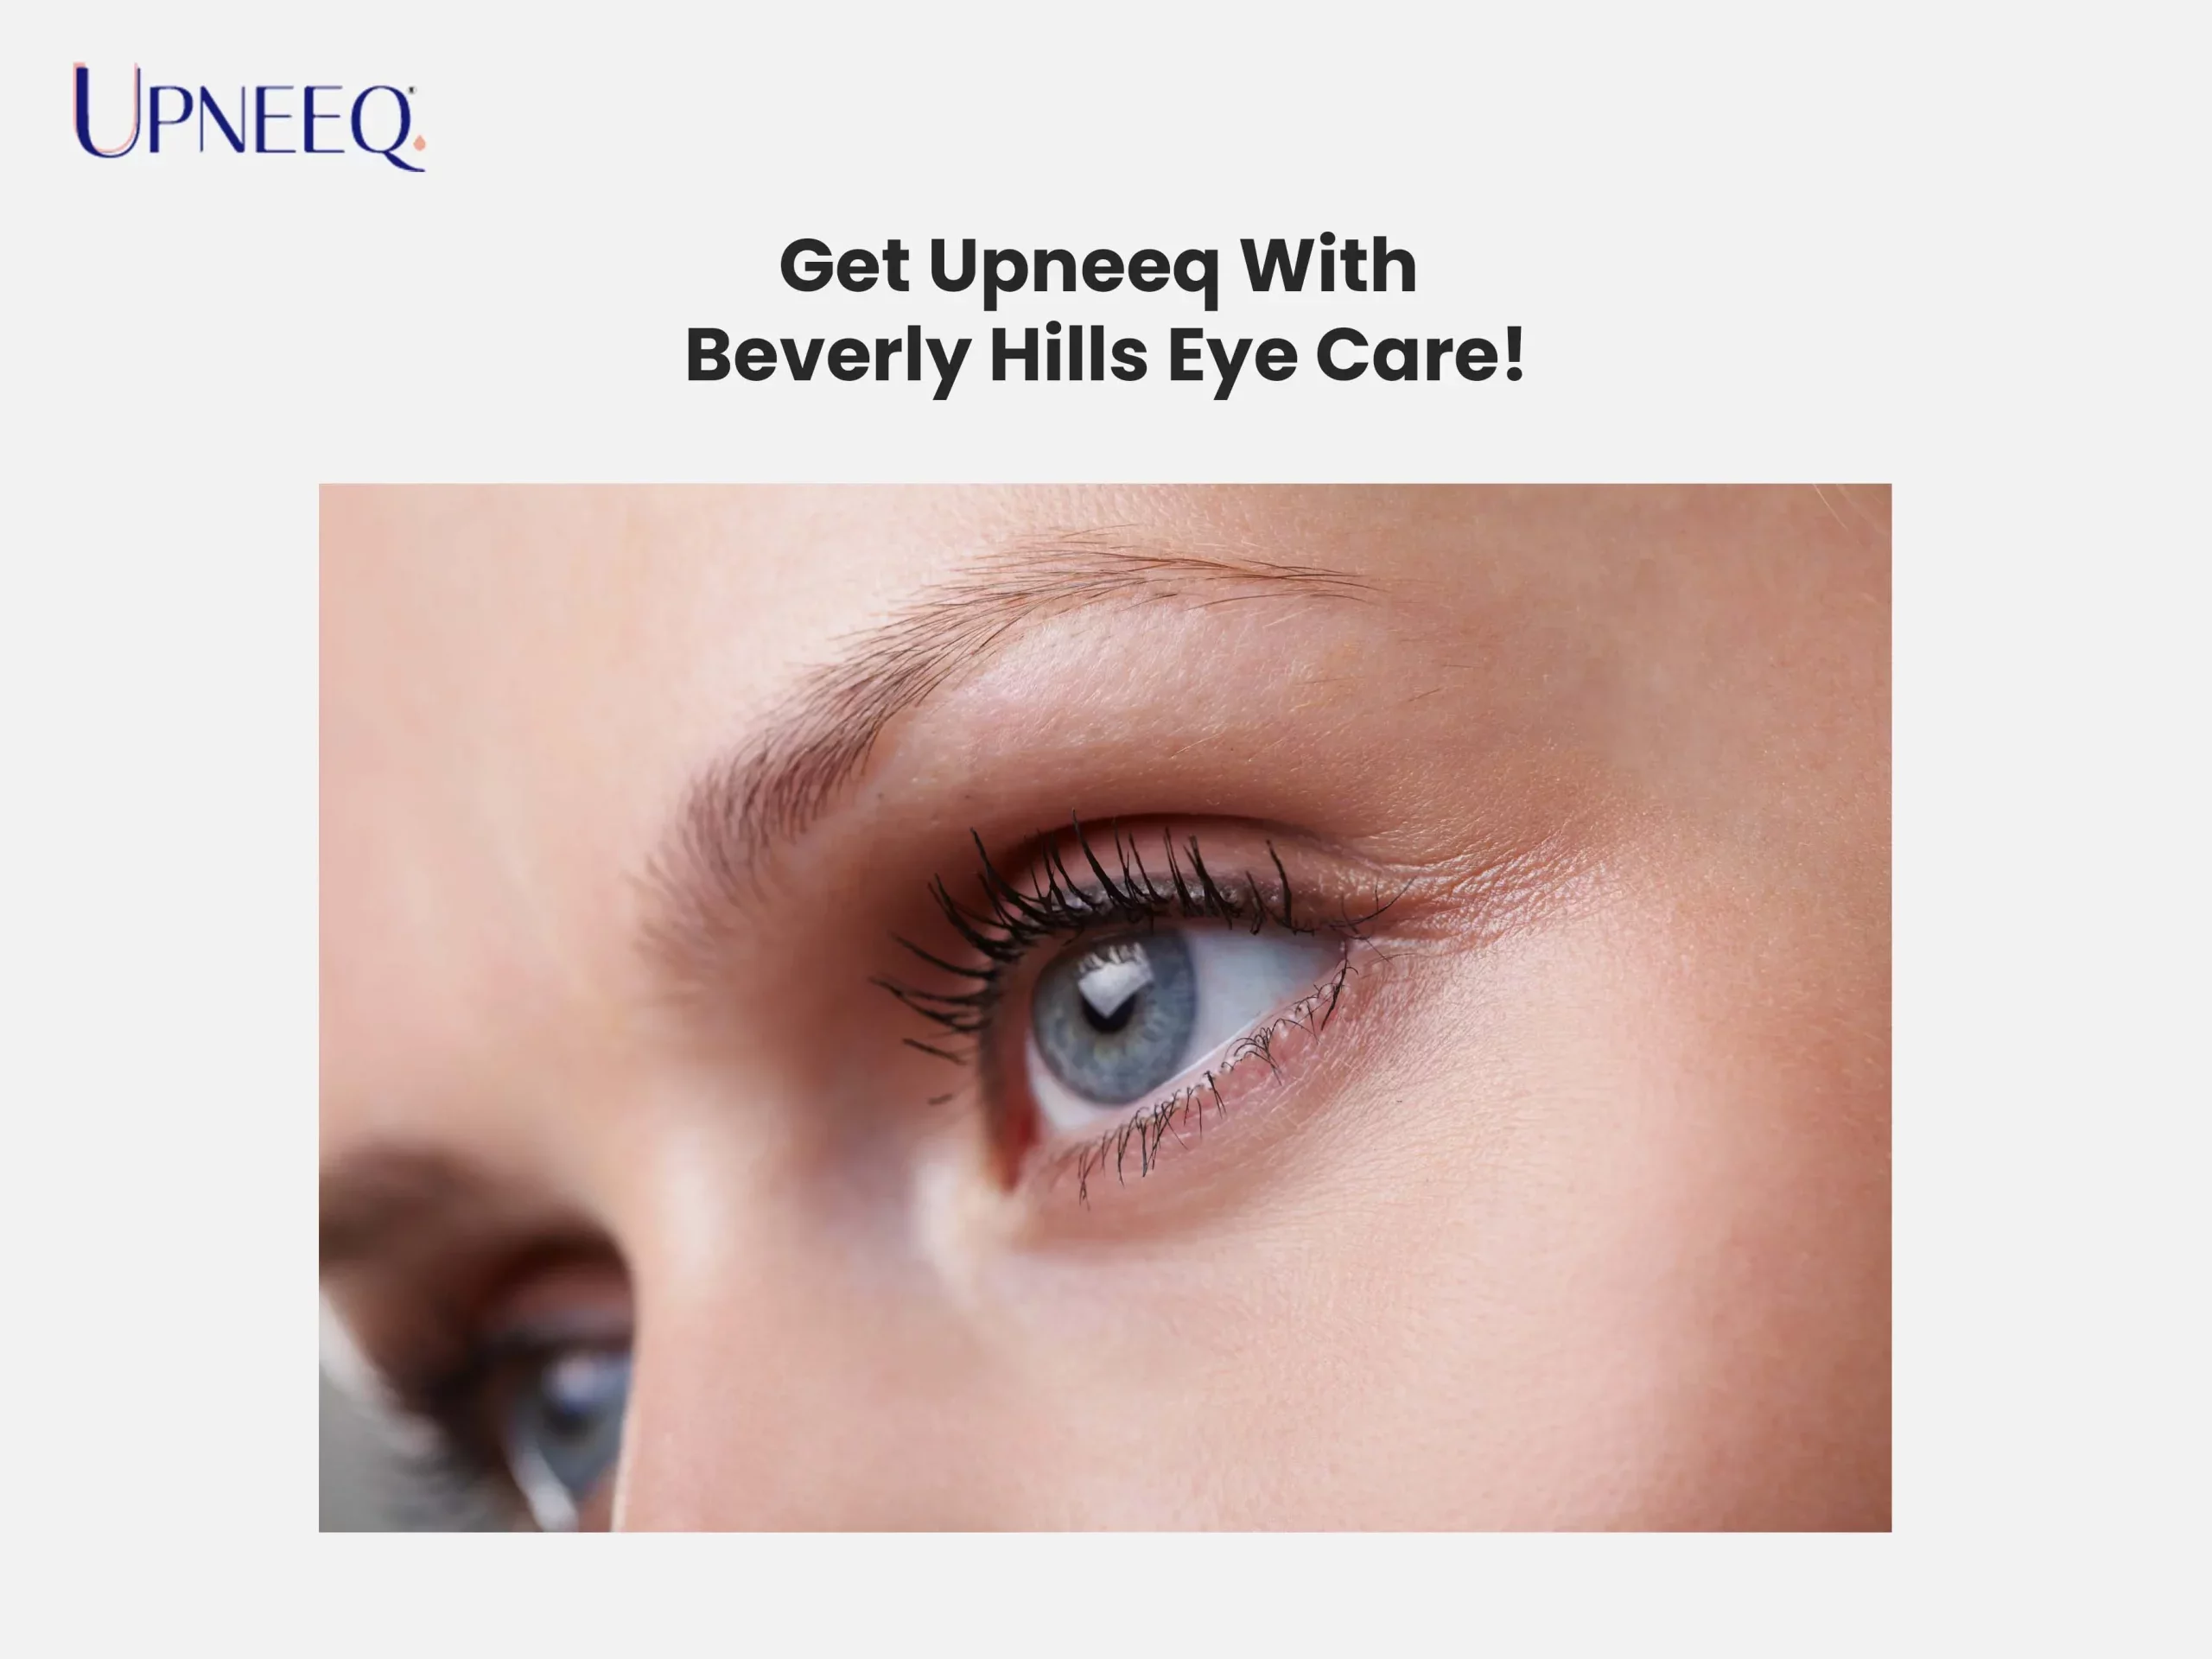 Get Upneeq With Beverly Hills Eye Care!